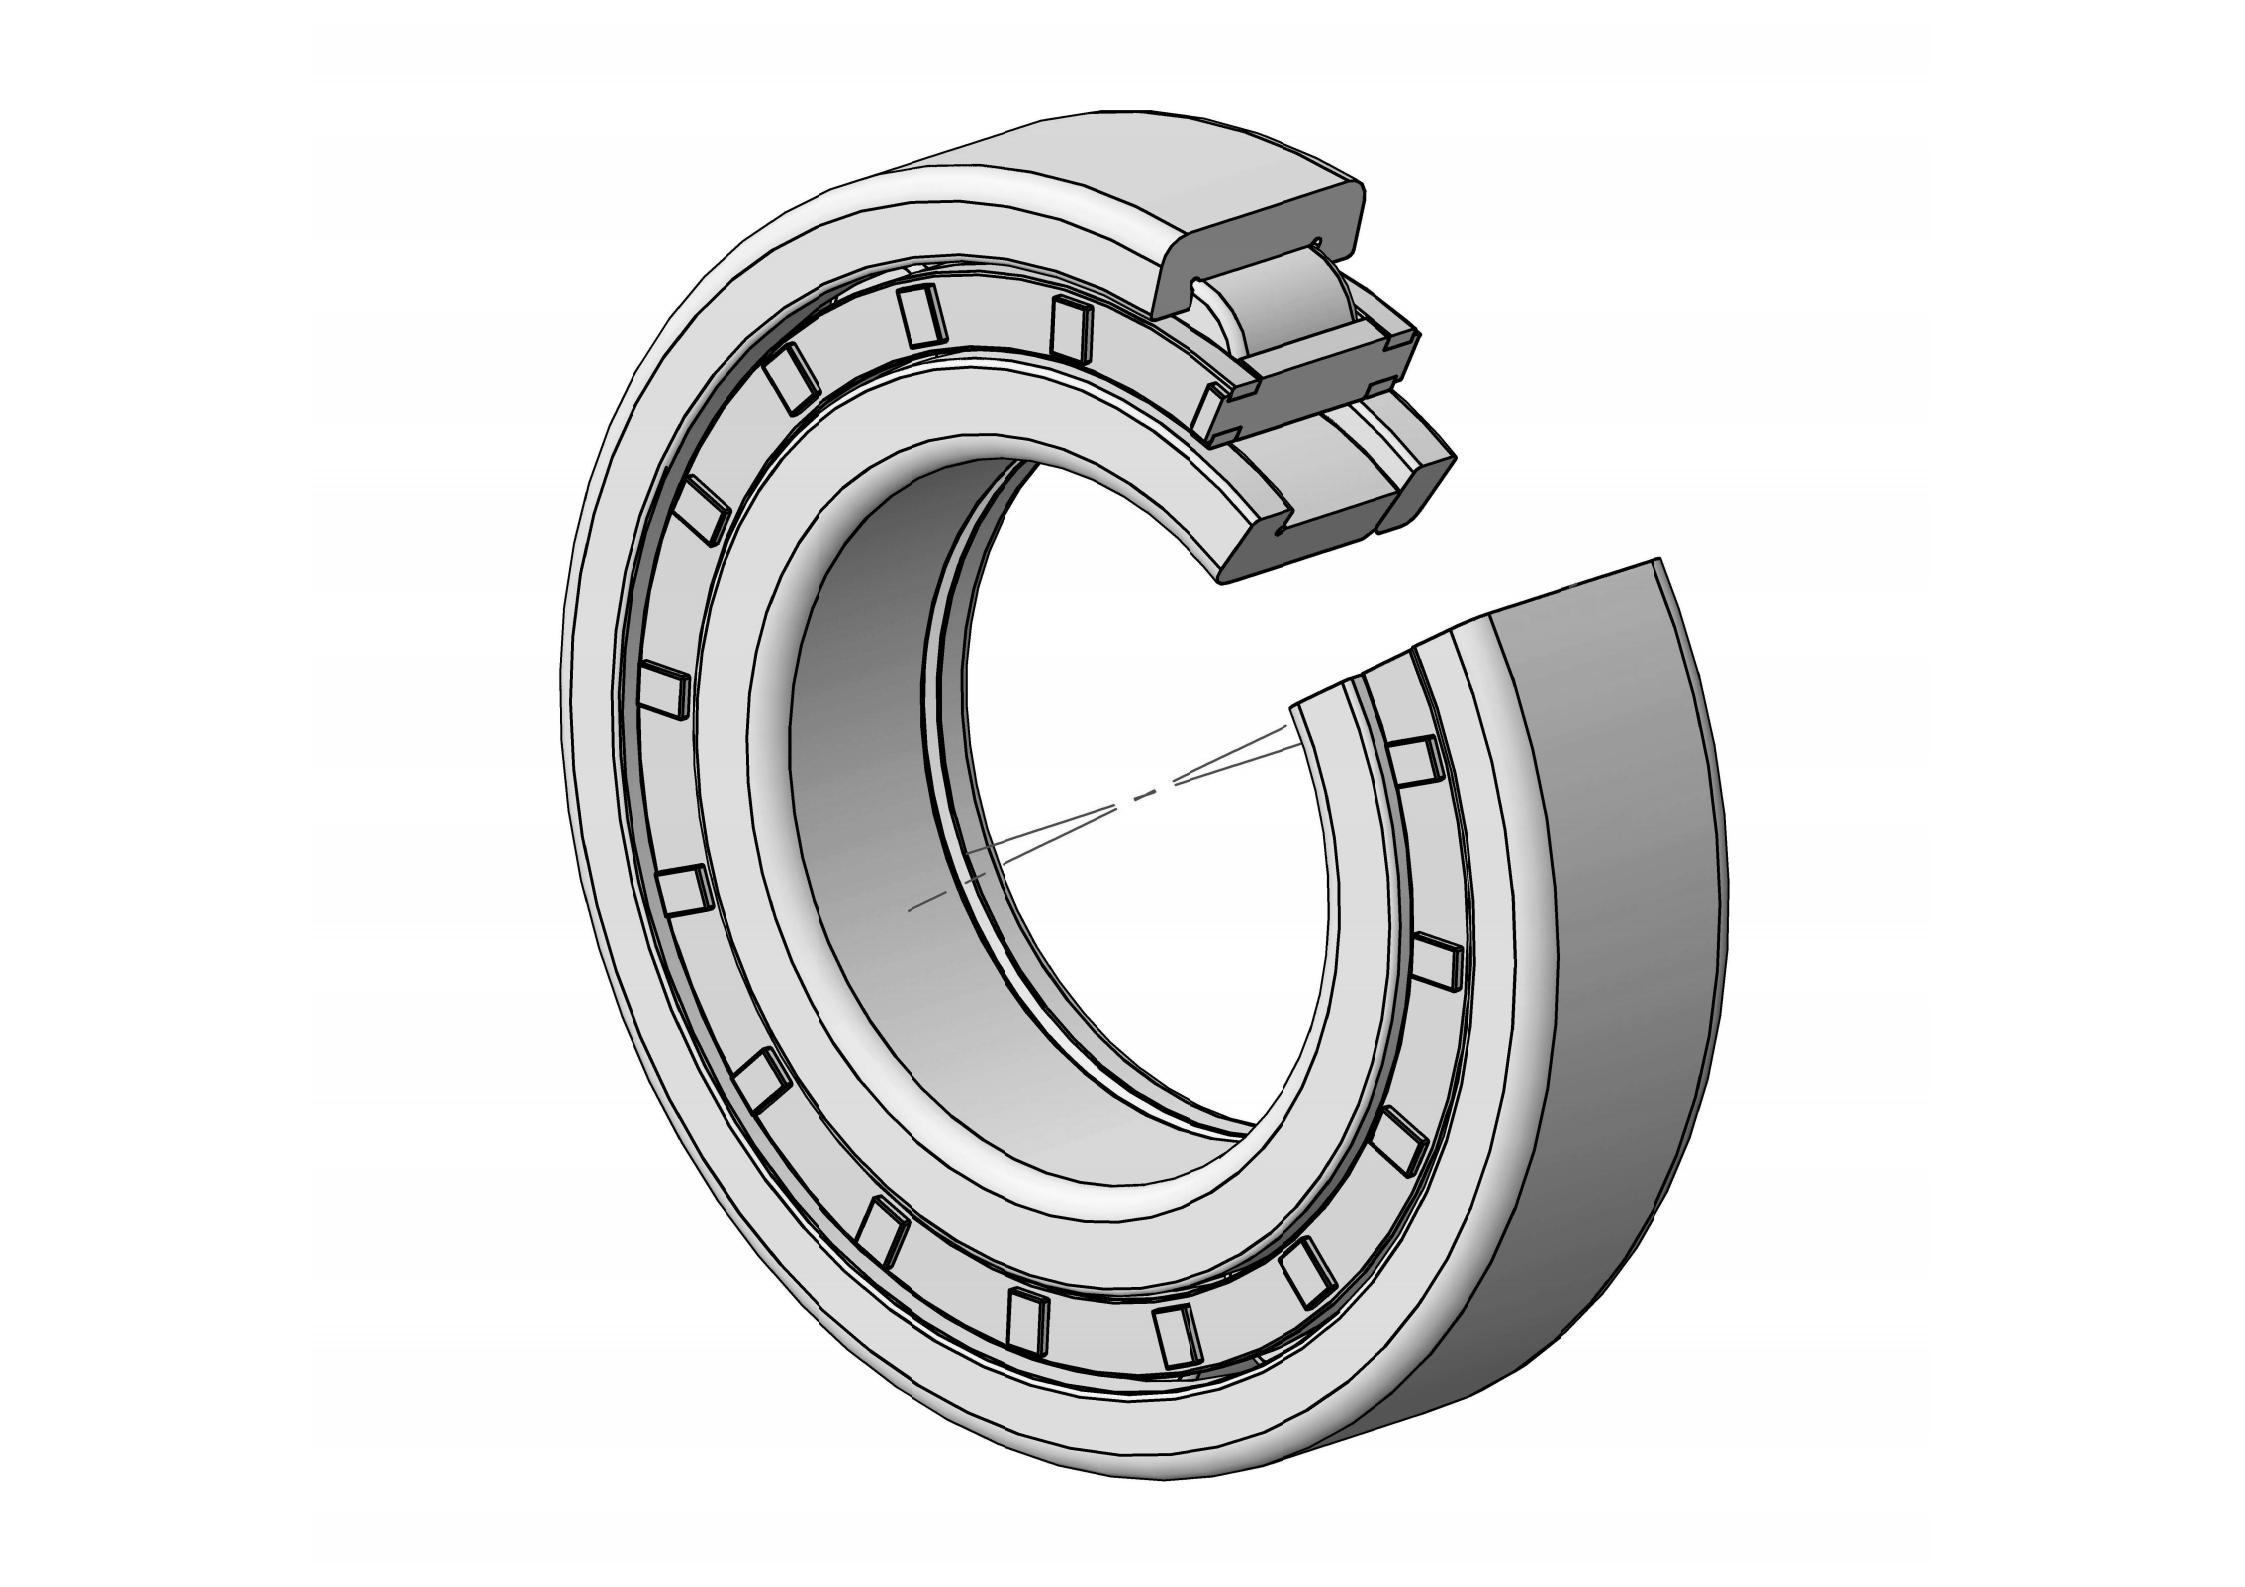 NUP315-E Single Row Cylindrical roller bearing 